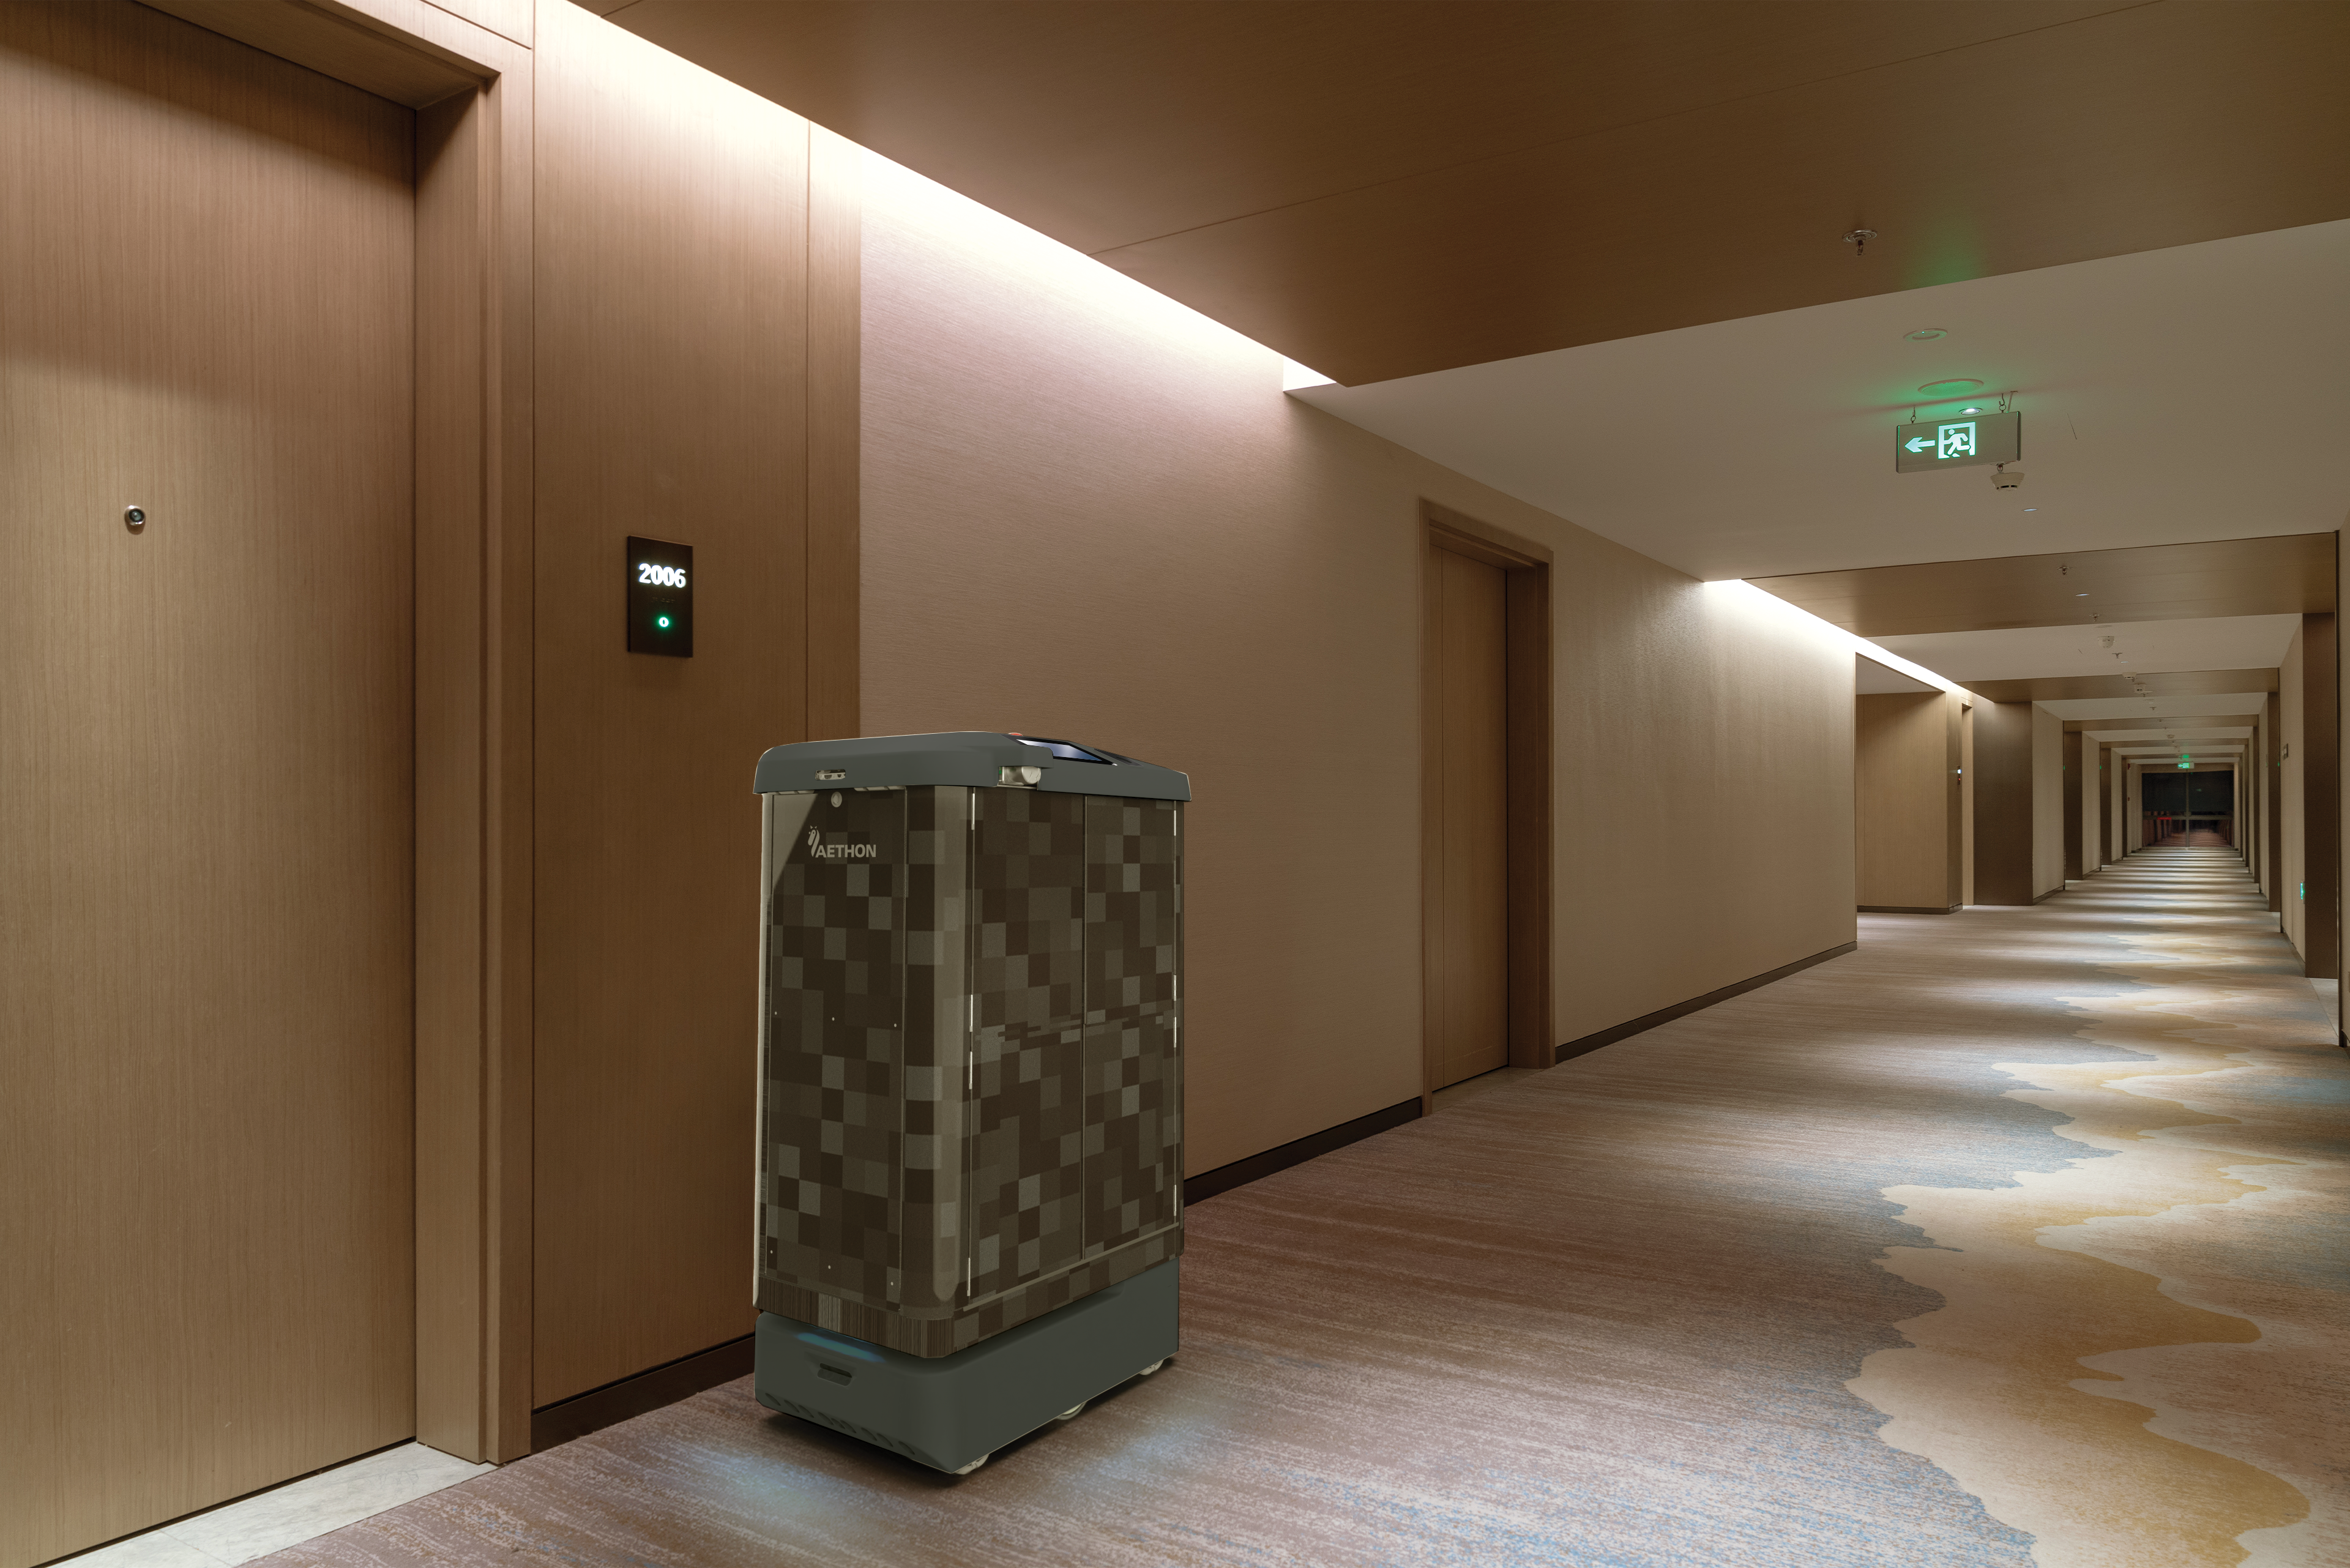 Aethon mobile robots allow you to offer mobile delivery to hotel rooms.